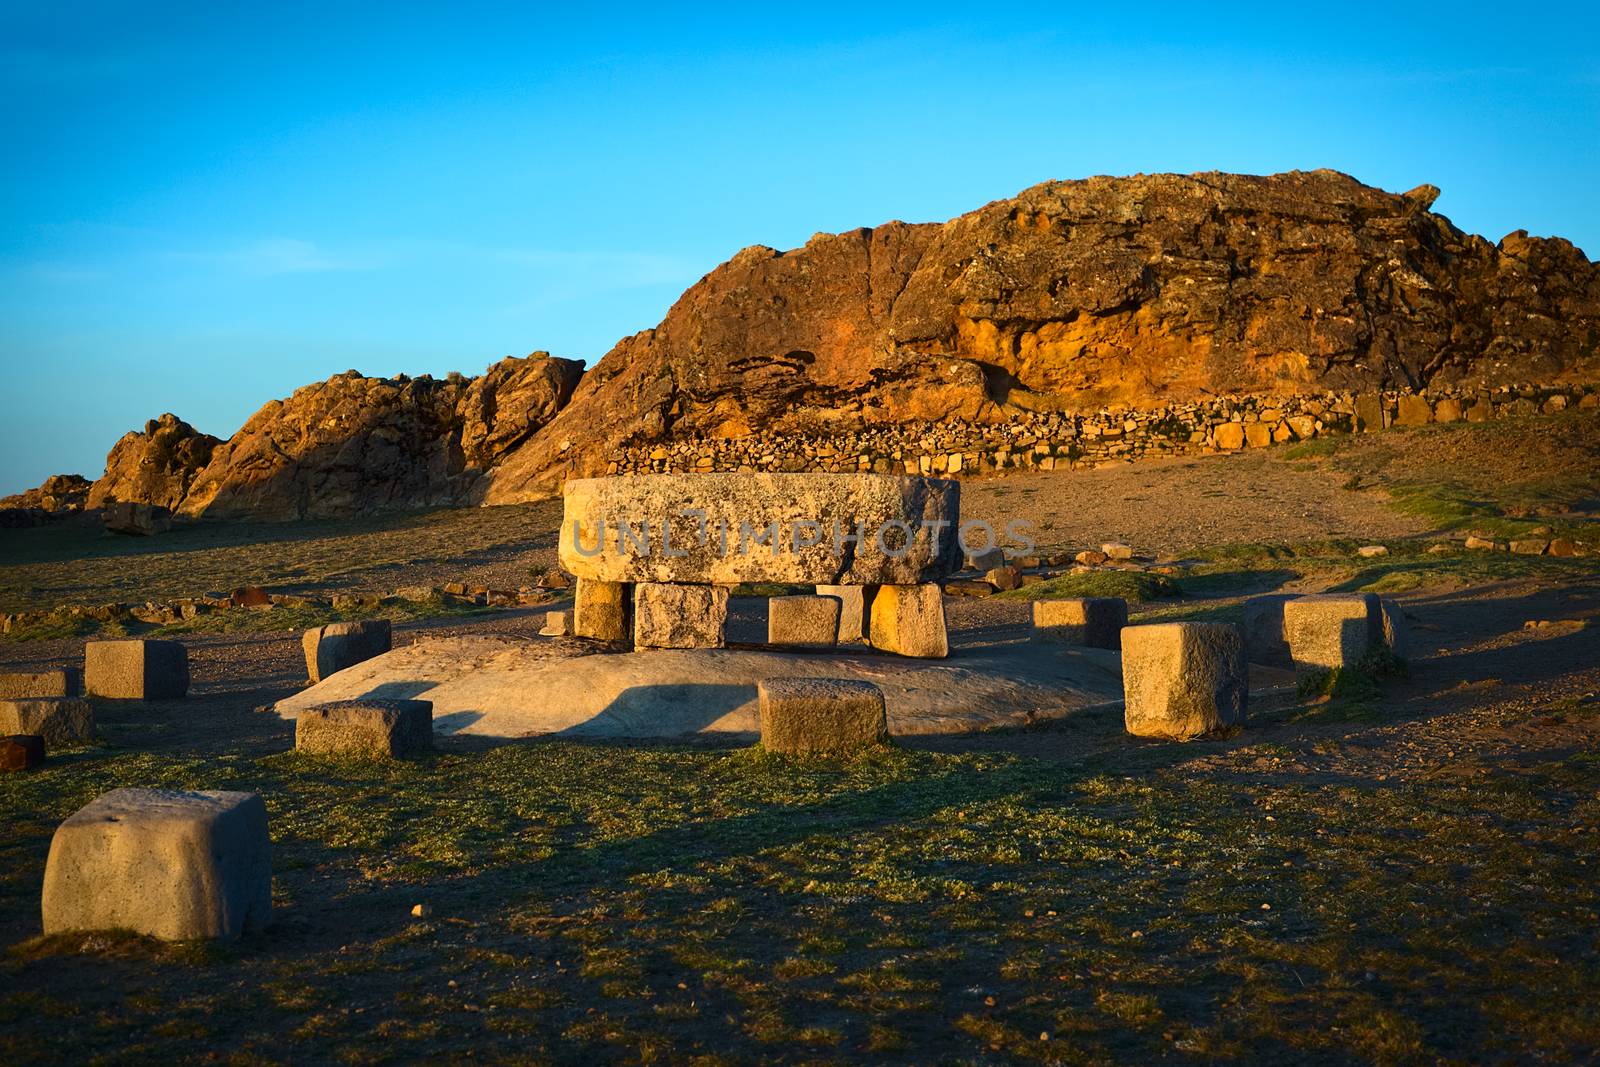 The Ceremonial Table and behind it the Rock of the Puma (Titicaca) popular archeological sites of Tiwanaku and Inca origin on Isla del Sol (Island of the Sun) in Lake Titicaca, Bolivia photographed at sunset